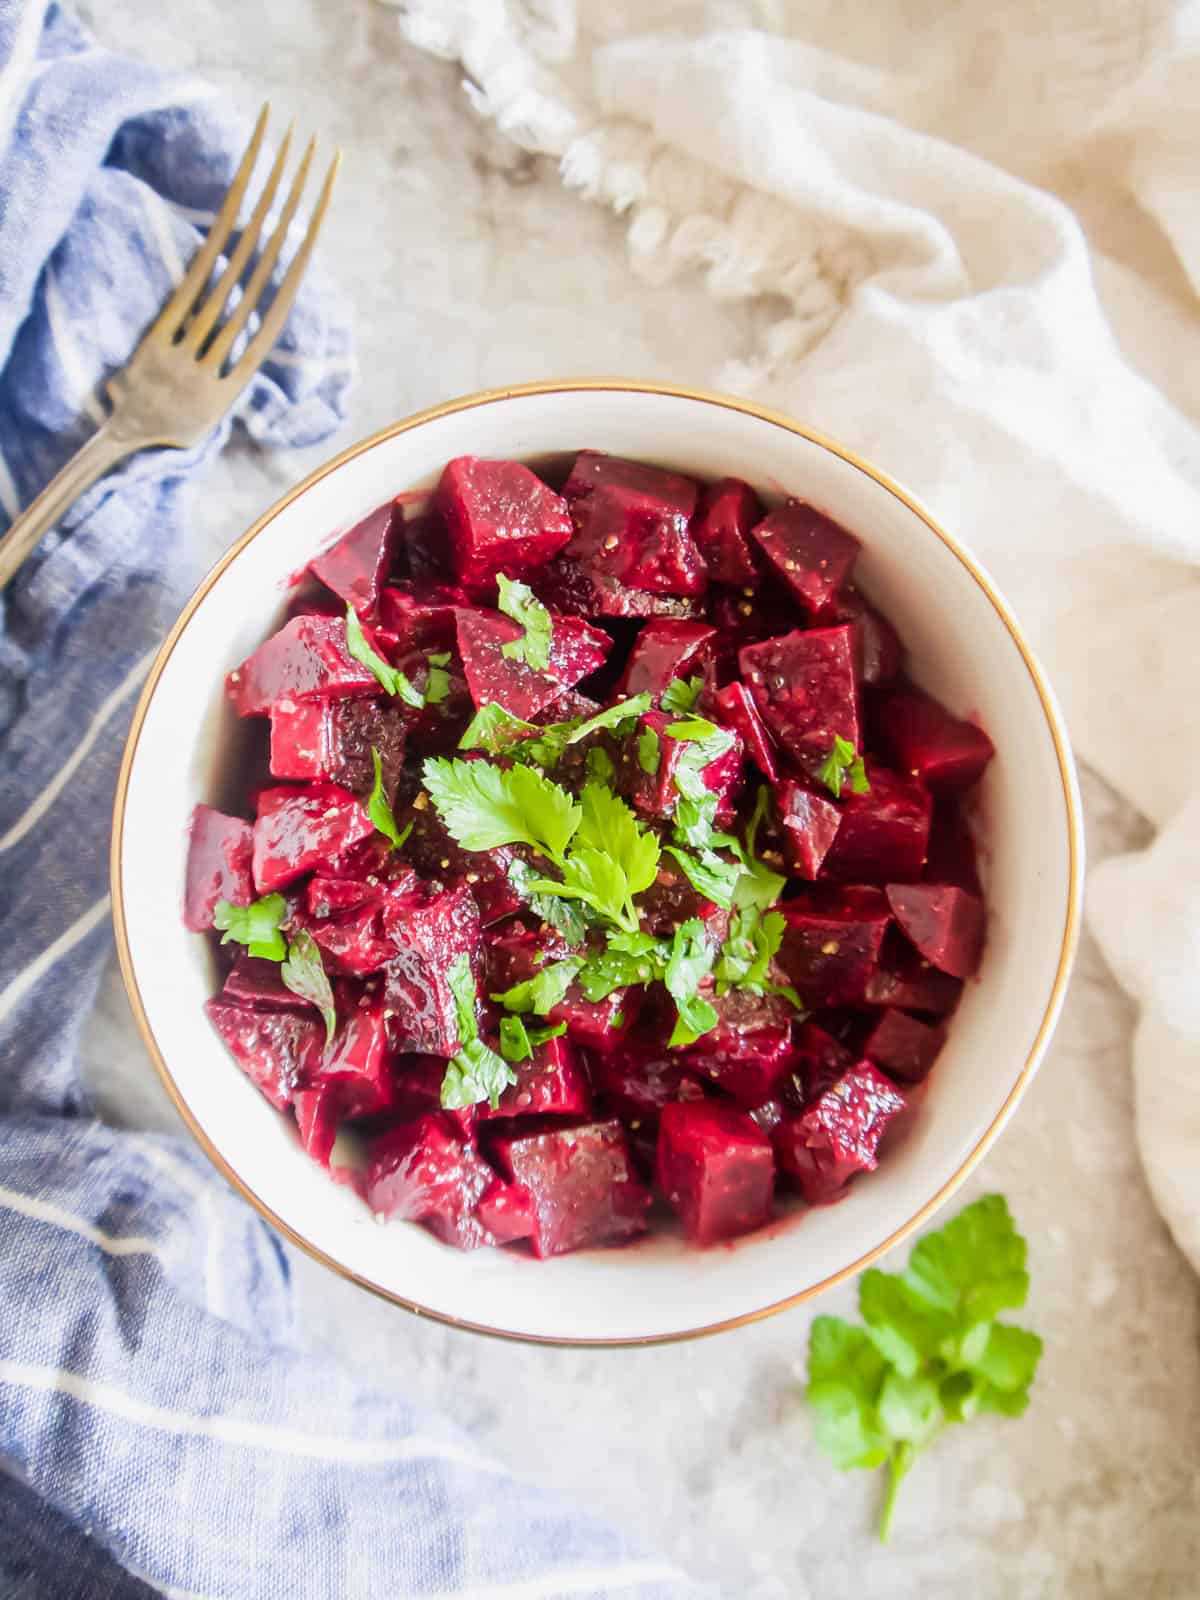 French Beet Salad with Mustard Vinaigrette (Paleo, Dairy-free, Gluten-Free) | Perchance to Cook